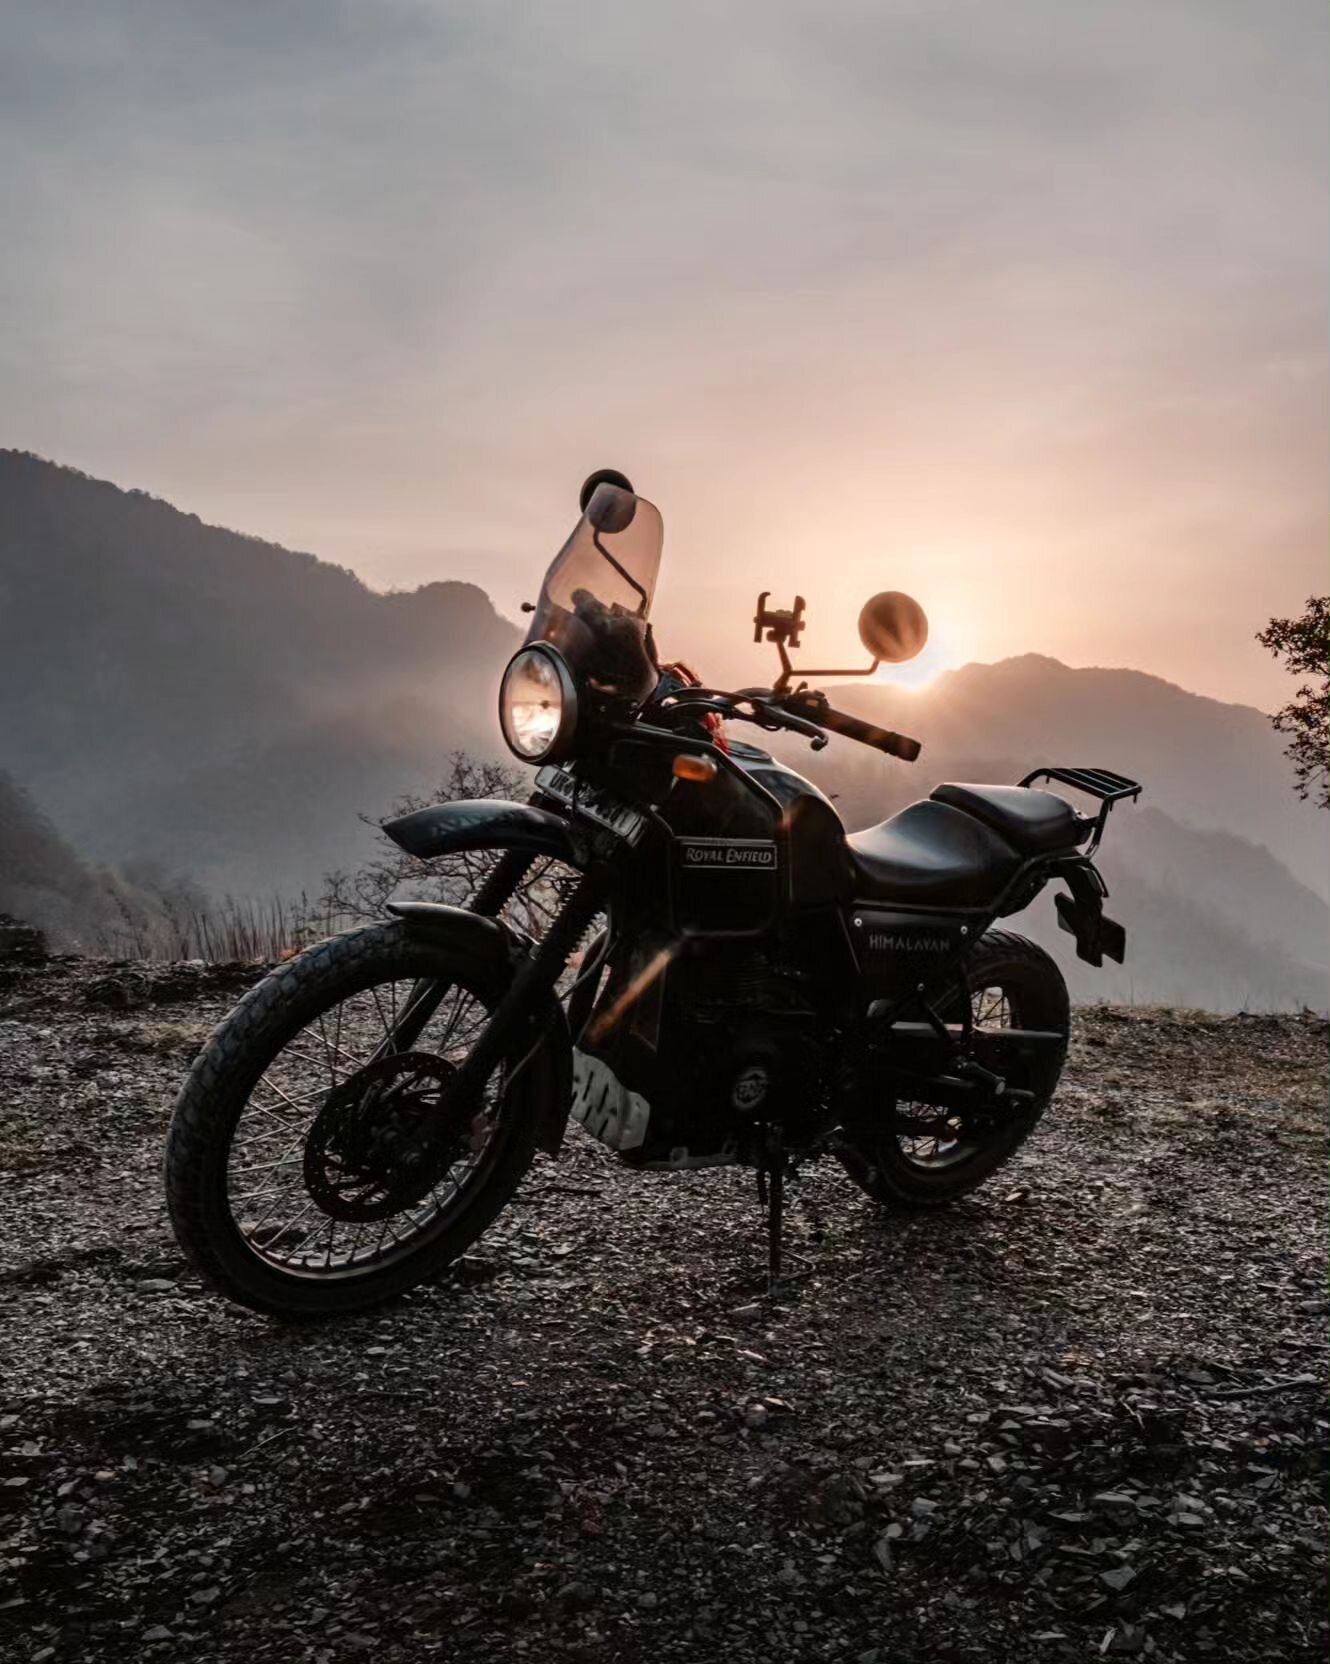 Been riding the @royalenfield Himalayan during this trip in Rishikesh, India. Seems only fitting since we're situated in the Himalayan foothills to be riding this Indian made adventure bike. 

Super impressed with how it handles these curvy and steep